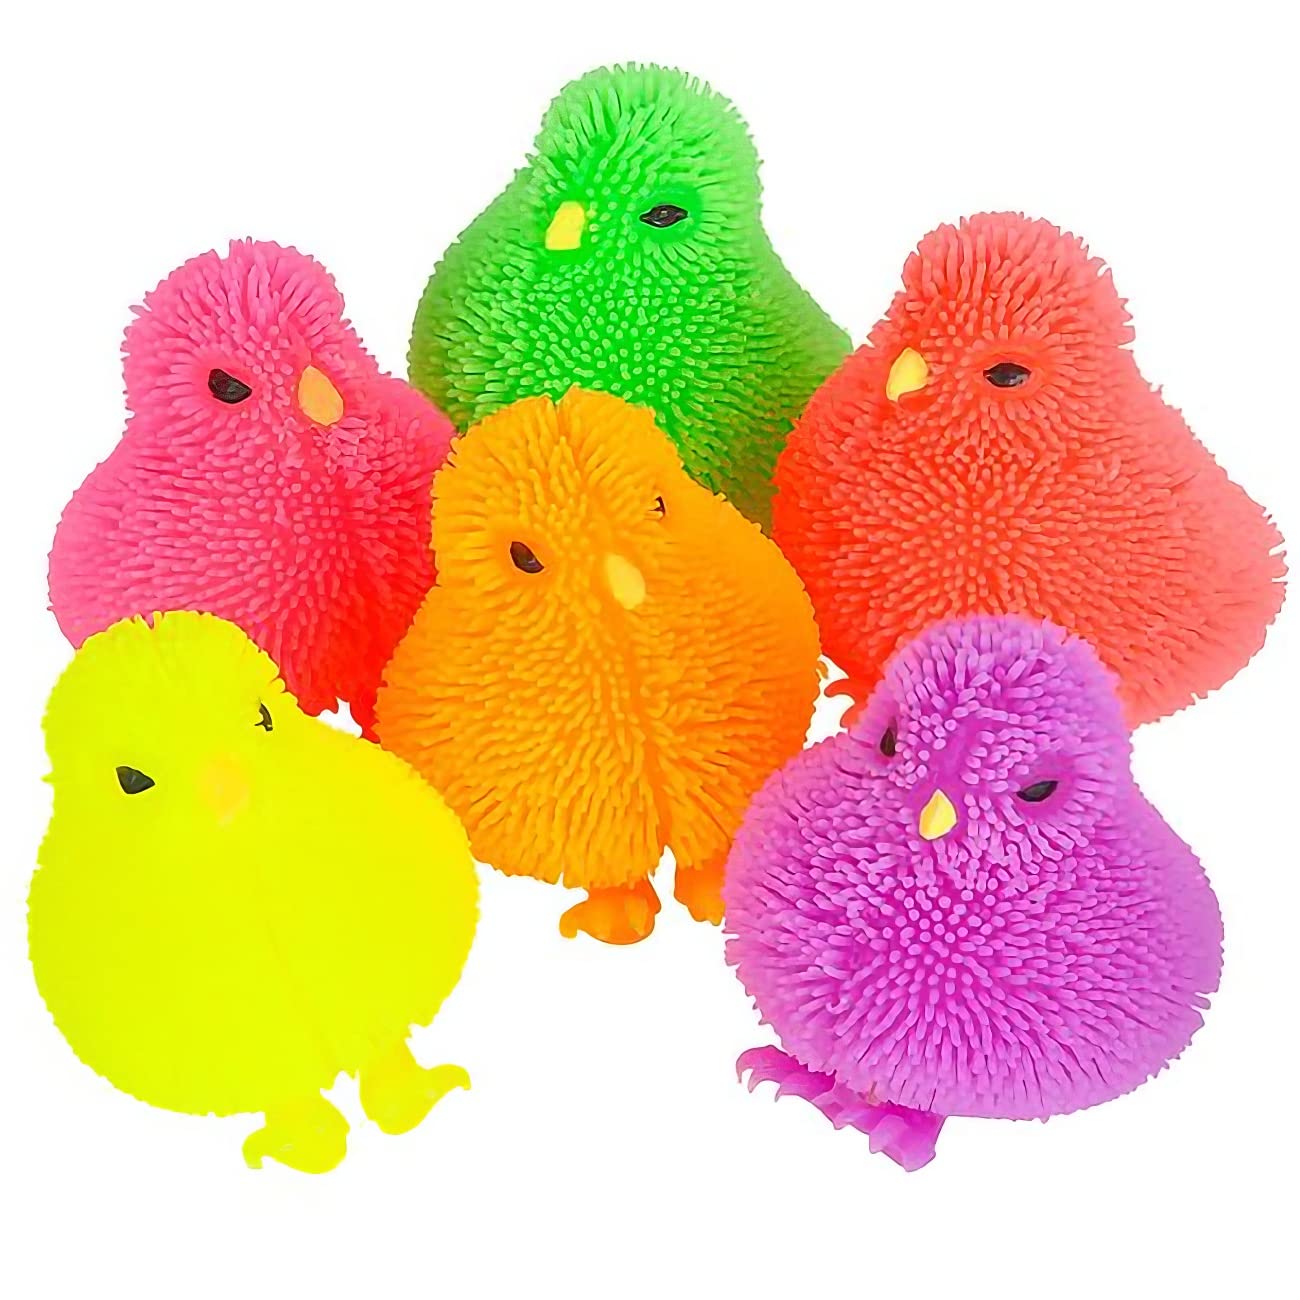 ArtCreativity 3 Inch Chicken Puffer Toys for Kids (Pack of 12) Chick Surprise Toys for Filling Easter Eggs, Easter Party Favors, Egg Hunt Supplies, Stress Relief Toys for Kids, Assorted Neon Colors